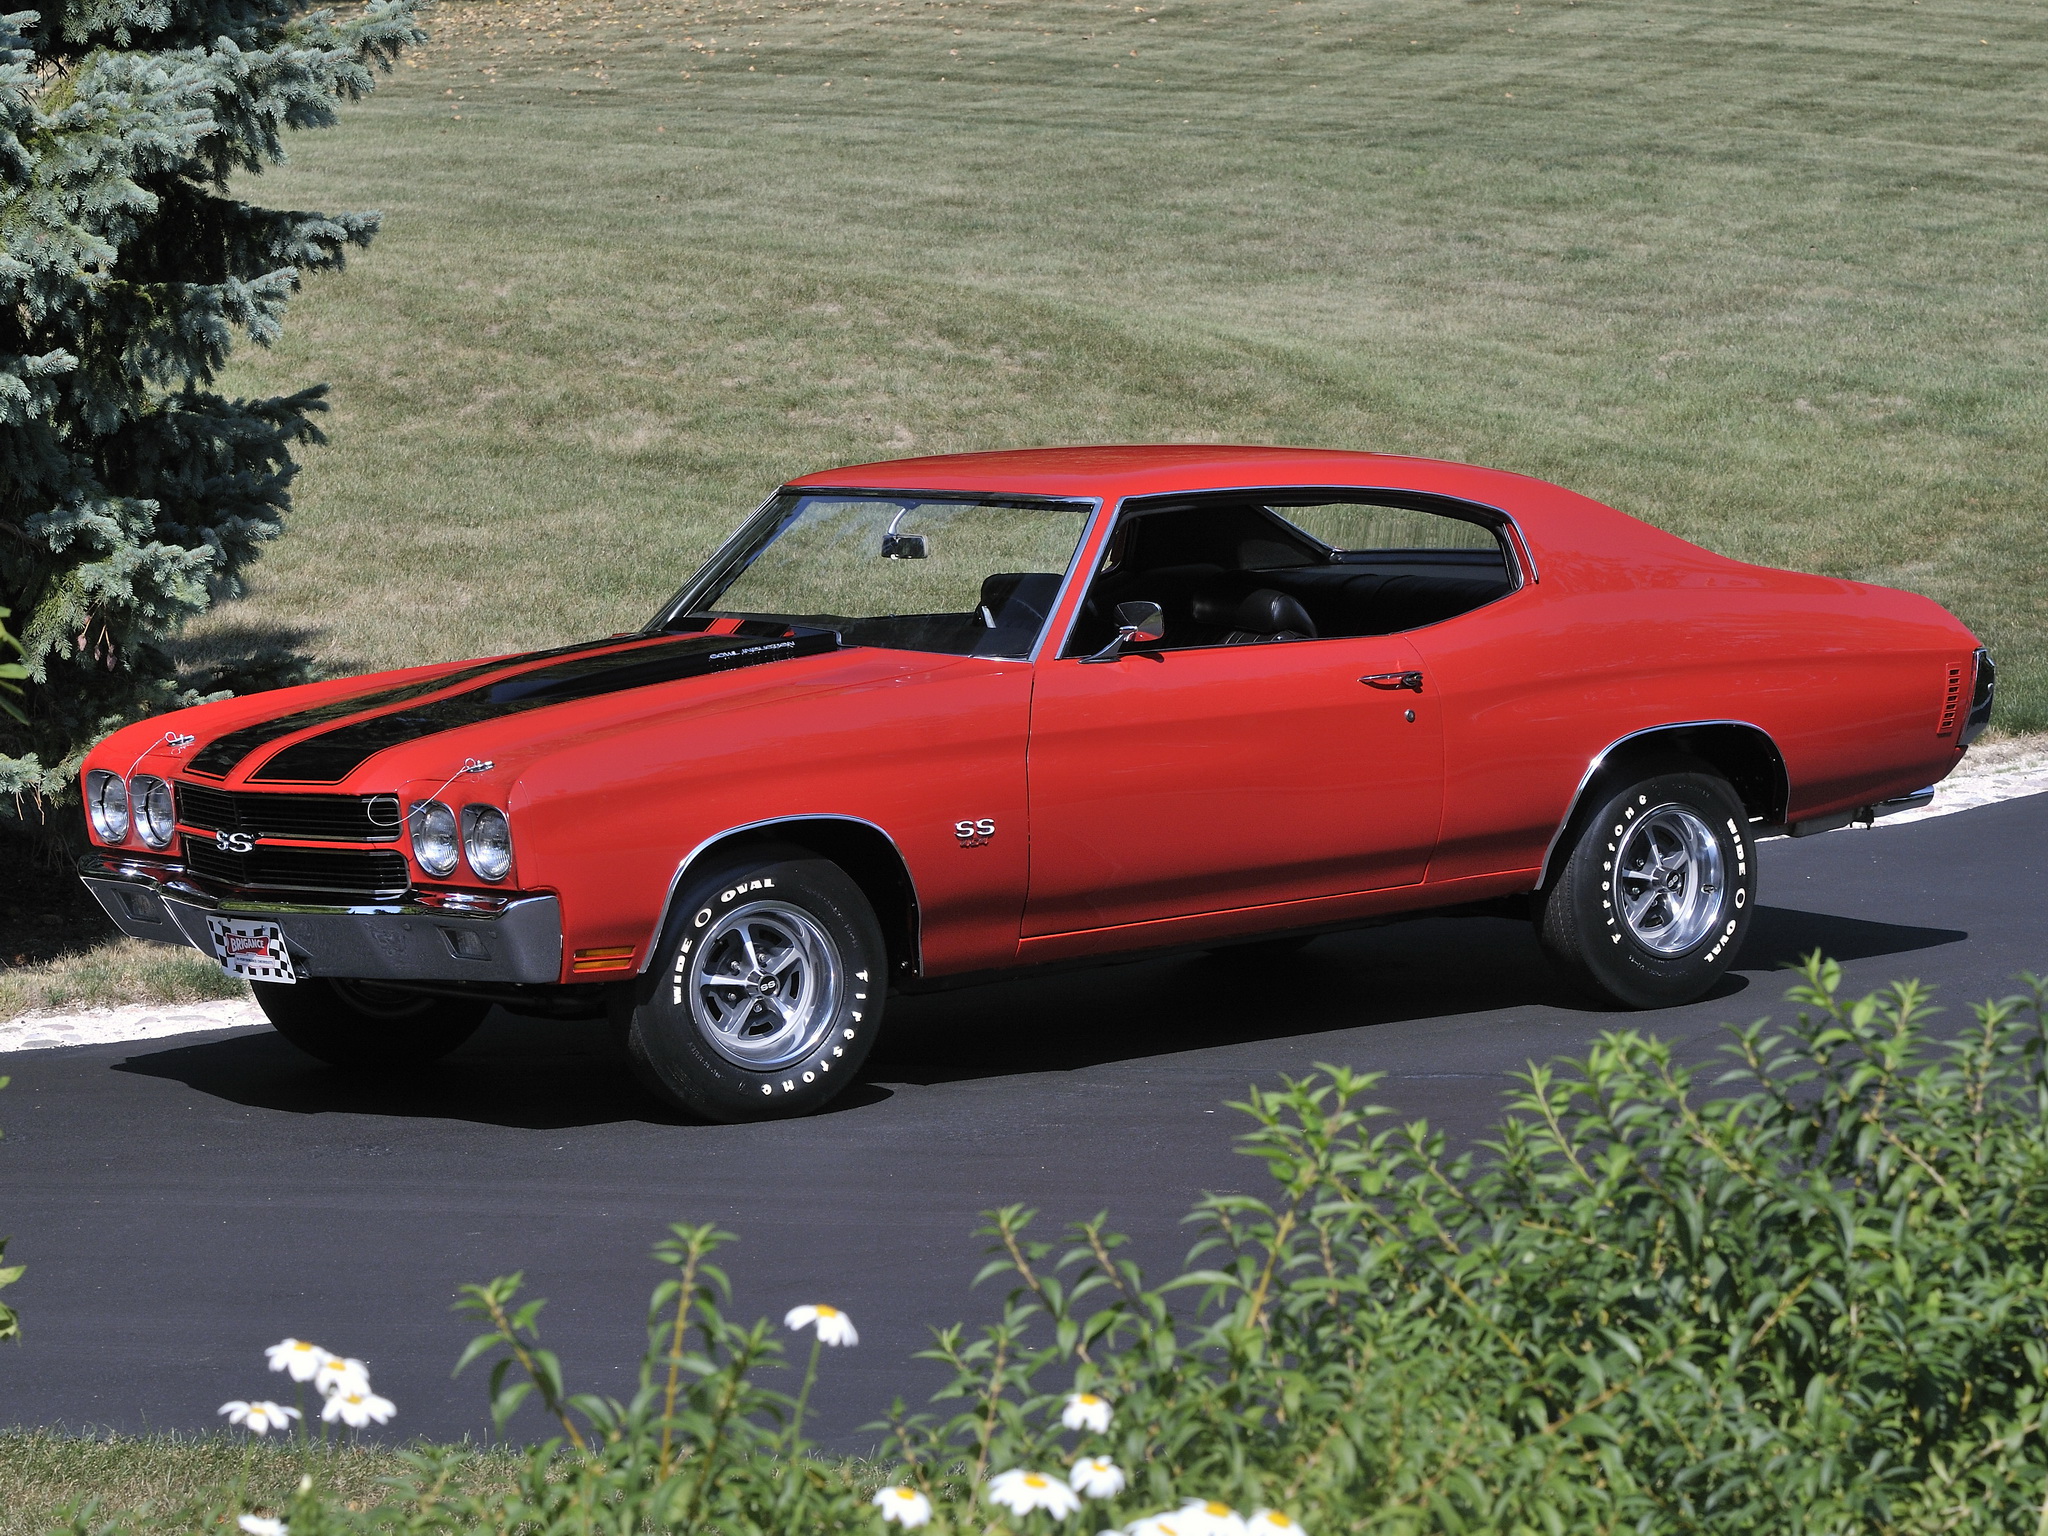 1970 Chevrolet Chevelle SS 454 LS6 Hardtop Coupe muscle